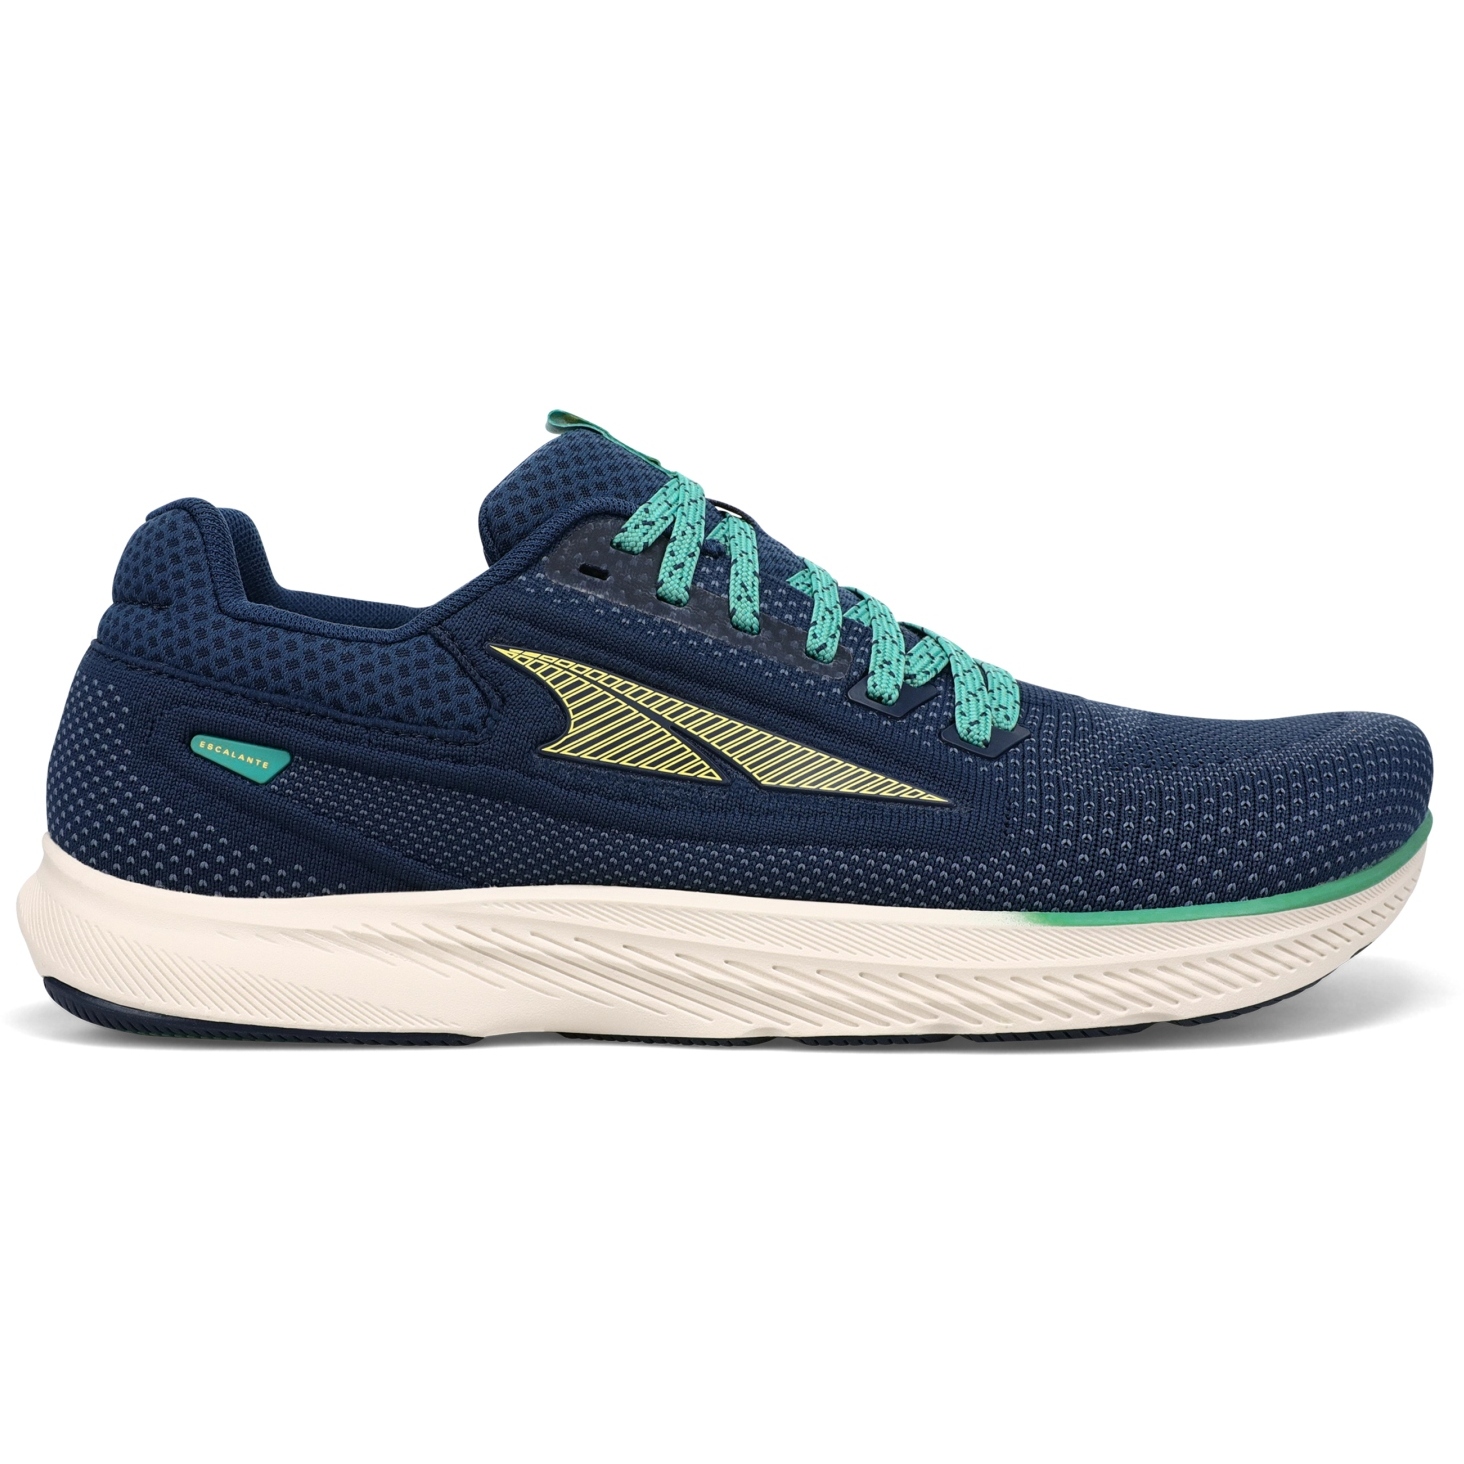 Picture of Altra Escalante 3 Running Shoes Men - Navy